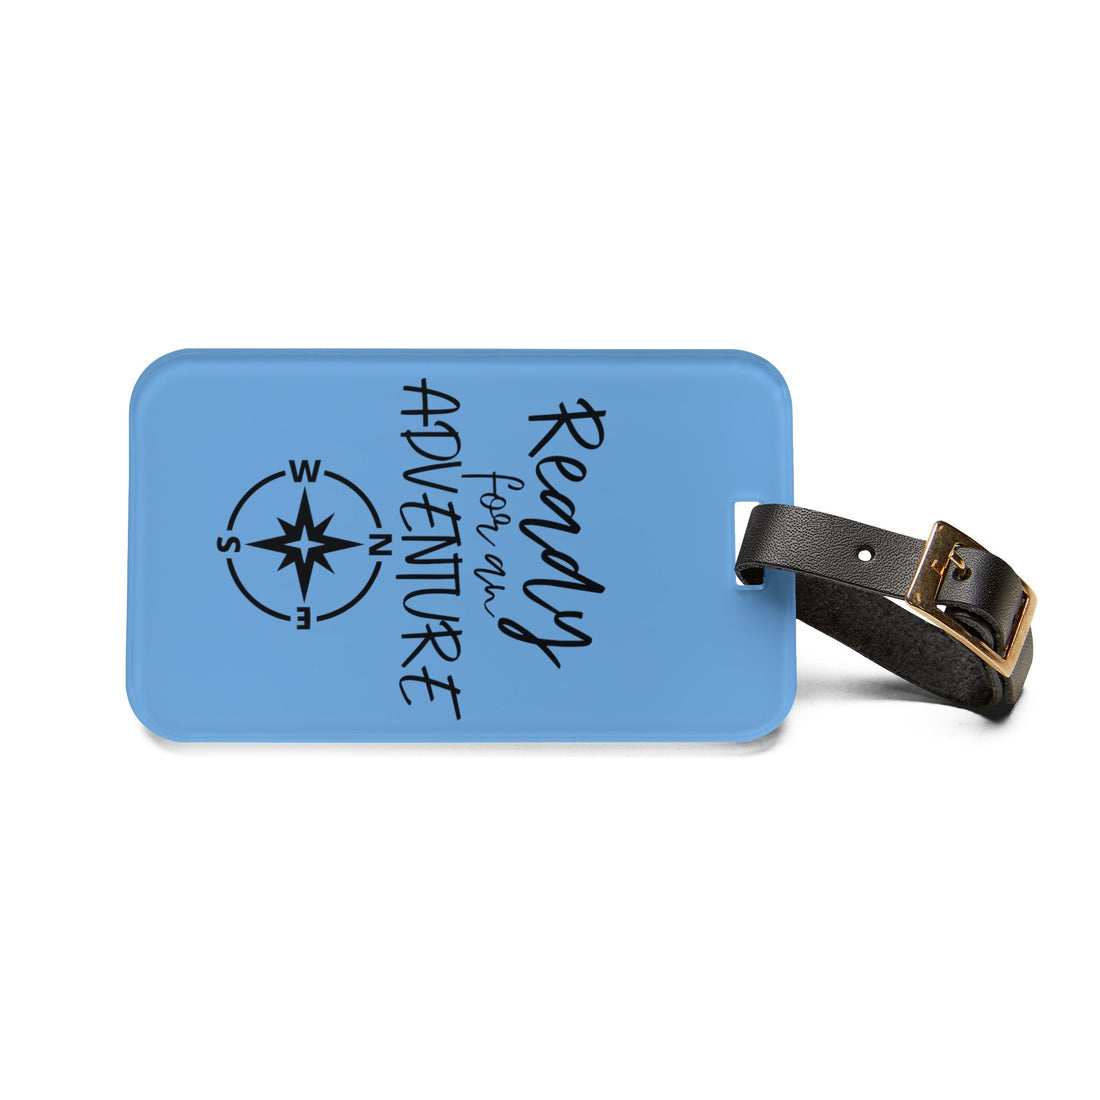 Ready For Adventure Luggage Tag - Accessories - Positively Sassy - Ready For Adventure Luggage Tag